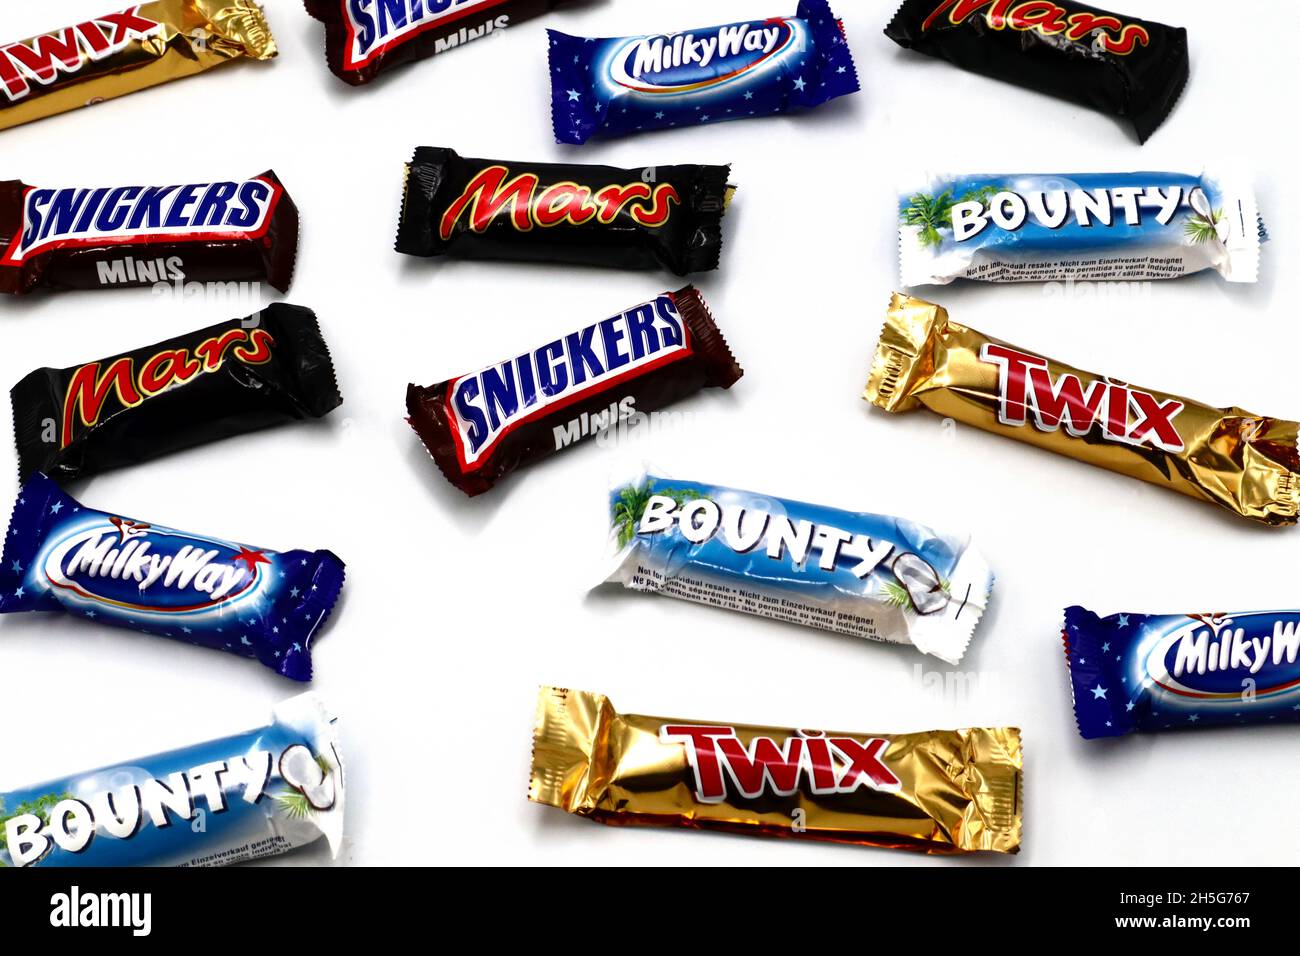 Mars, Bounty, Snickers, Milky Photo Alamy Mars Way Twix of and Stock - Incorporated brands chocolate bars